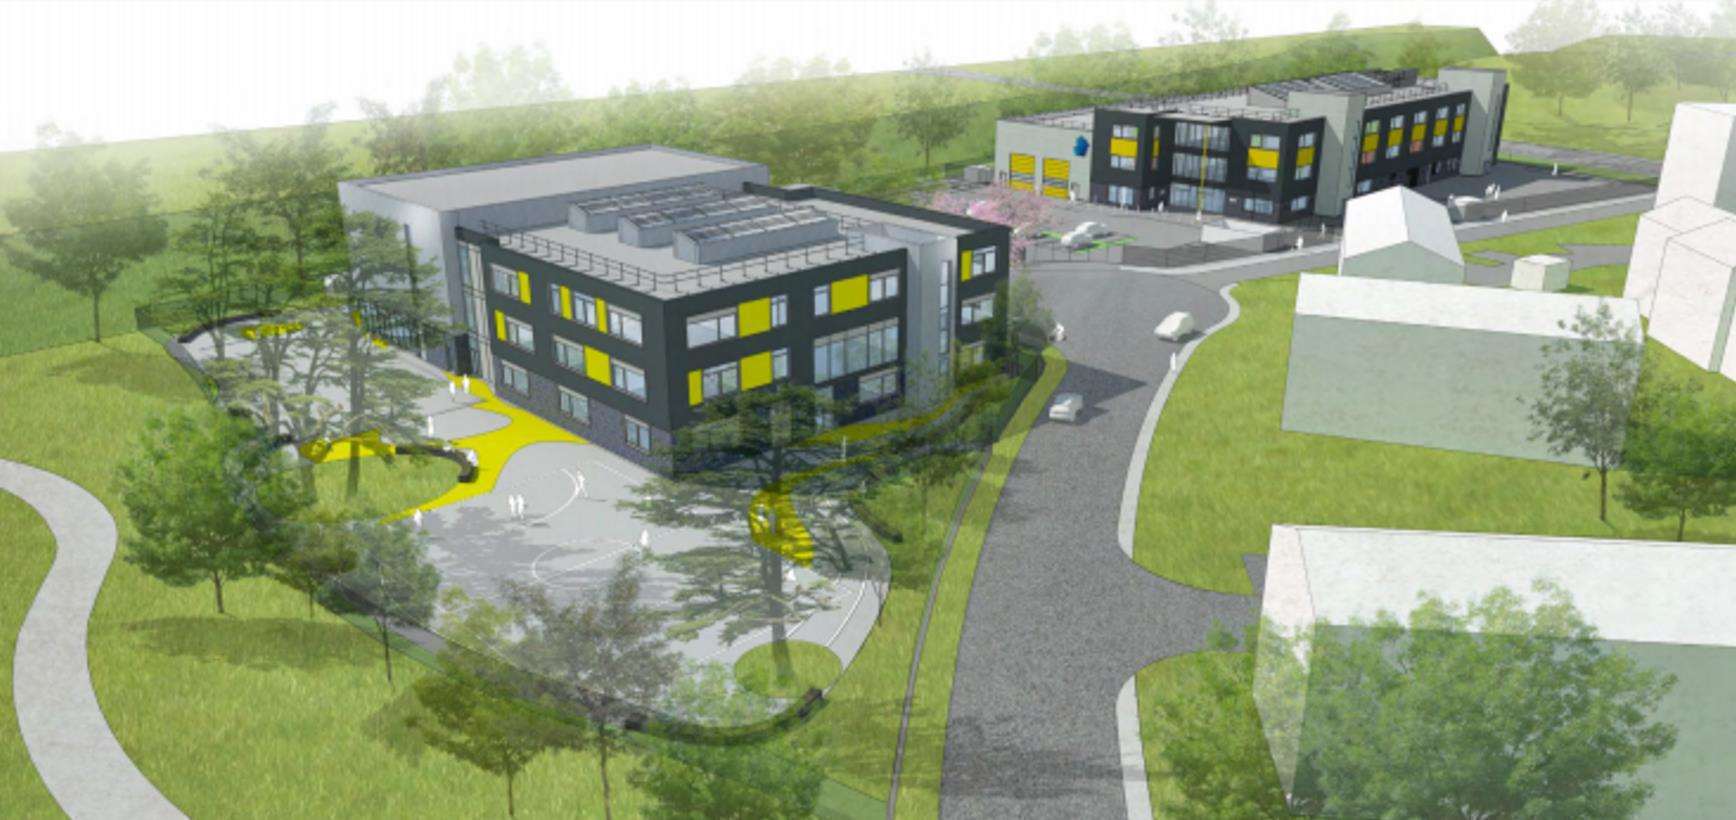 The Leigh UTC could soon be neighboured by a 360-place feeder academy for students aged 11 to 14